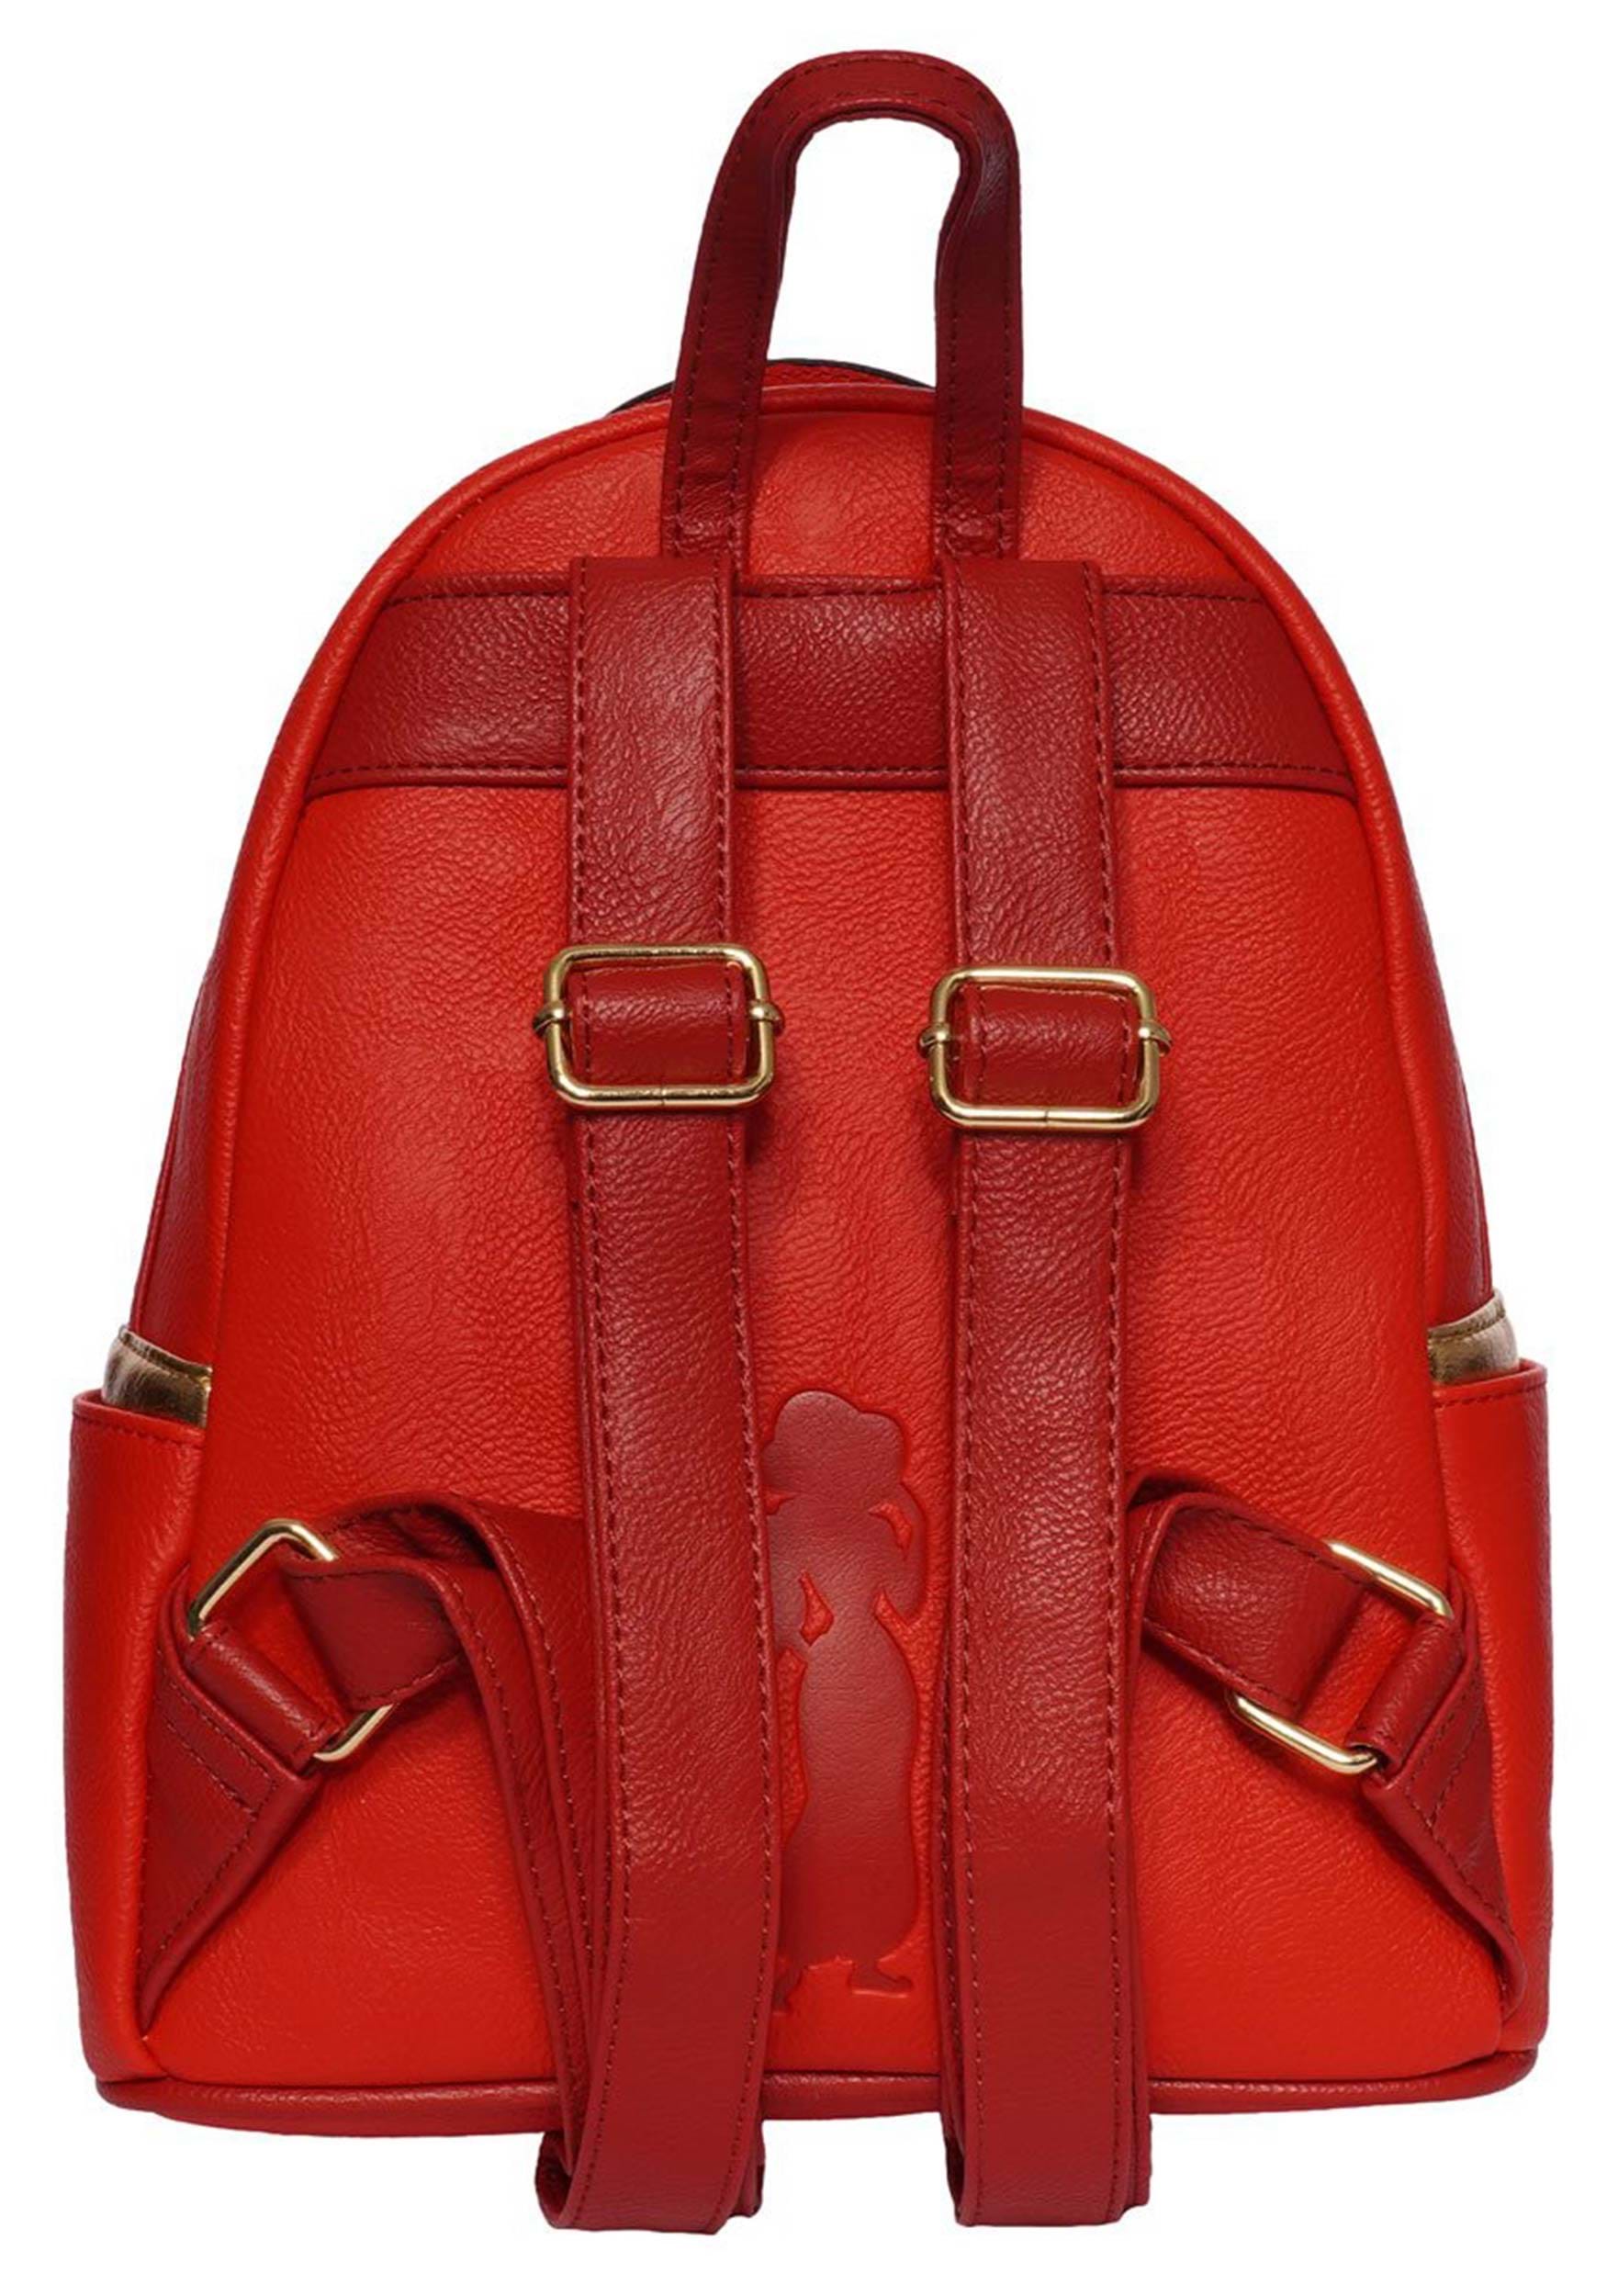 Buy Head Sprint Red Printed Laptop Backpack Online At Best Price @ Tata CLiQ